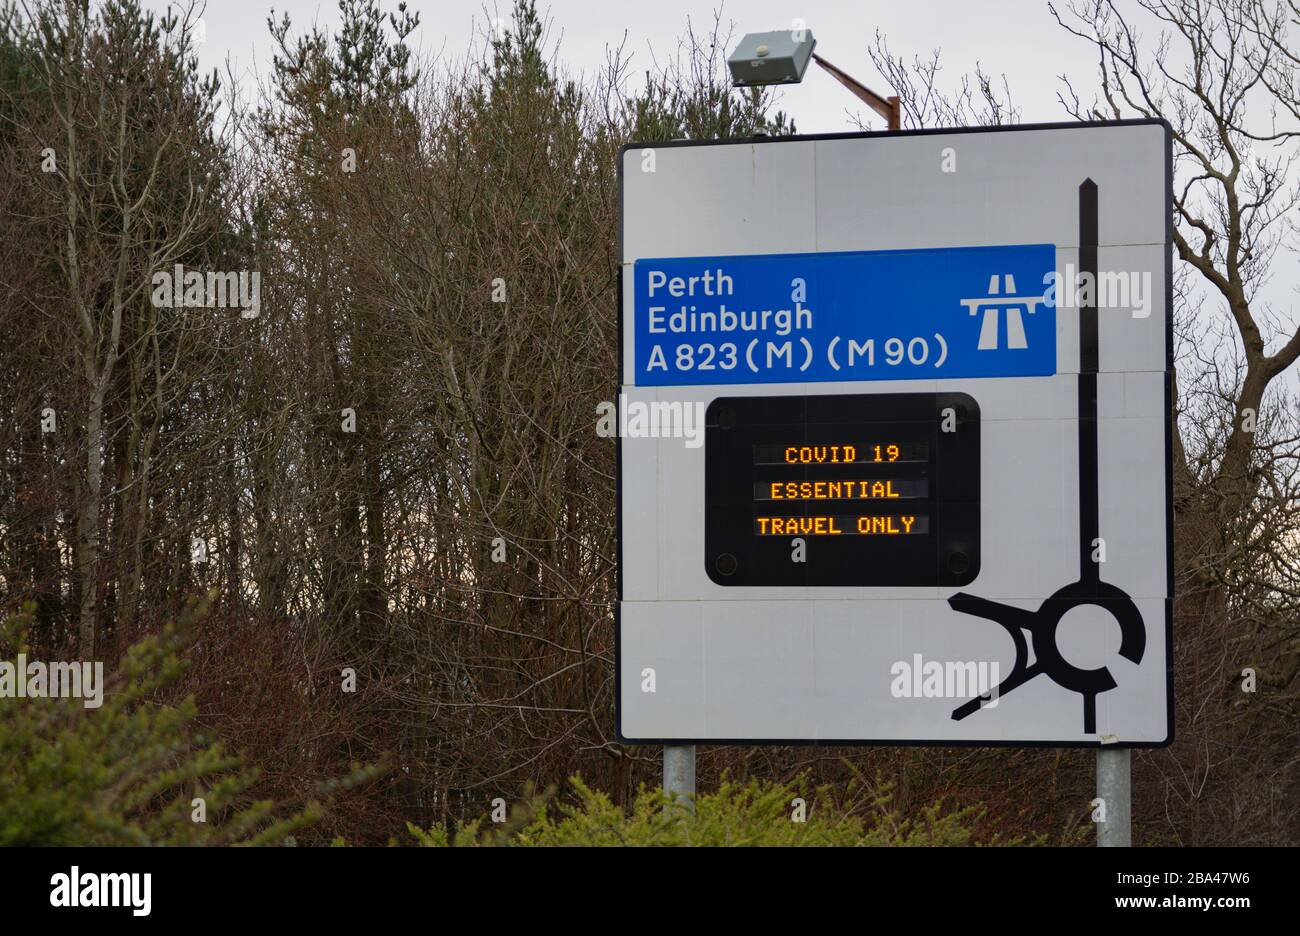 Covid-19 travel restrictions information on motorway sign in Scotland Stock Photo